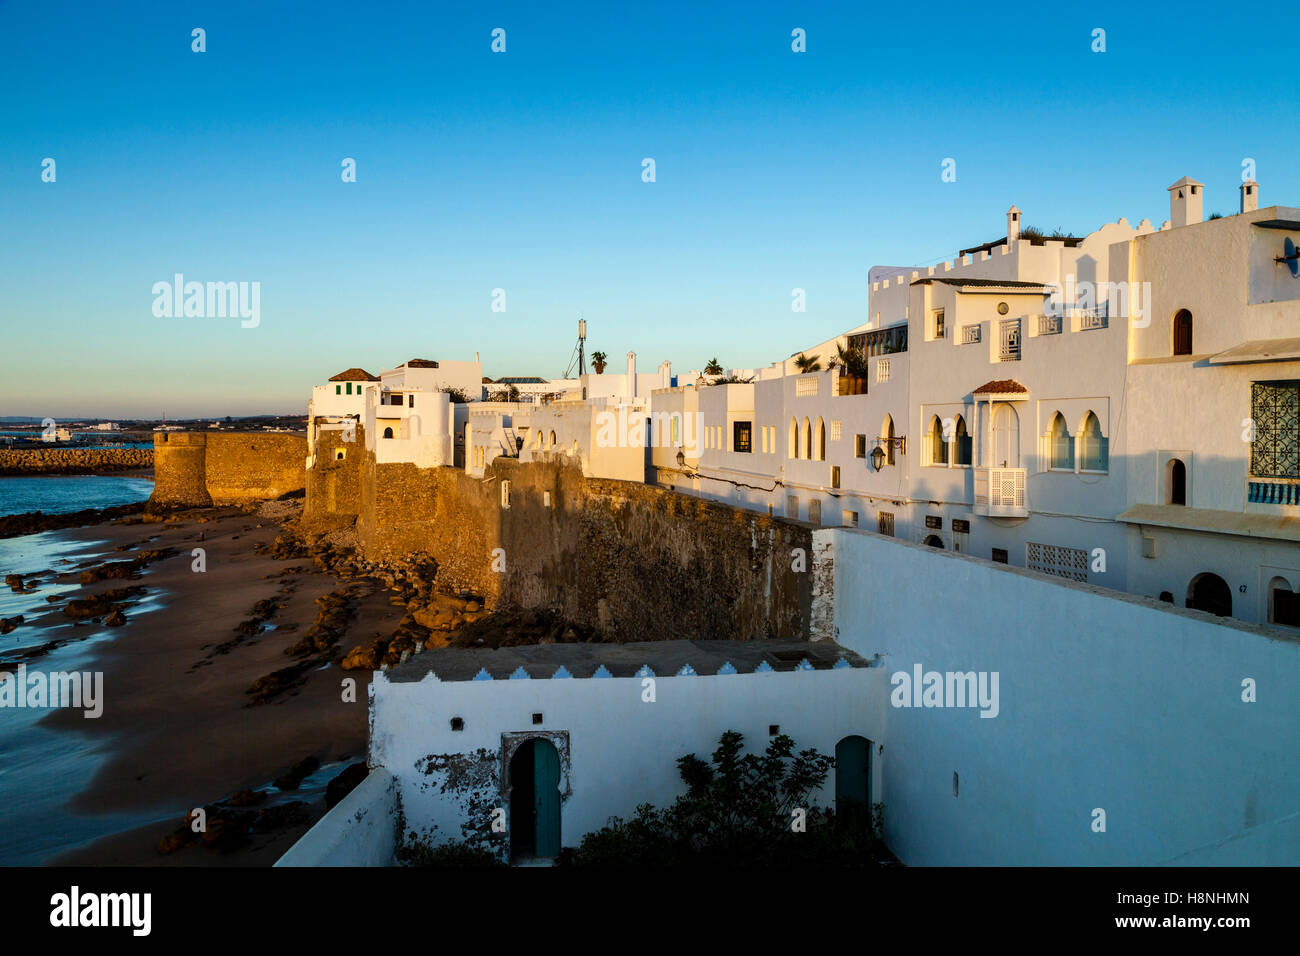 A View Of The Fortress Town Of Asilah, Morocco Stock Photo